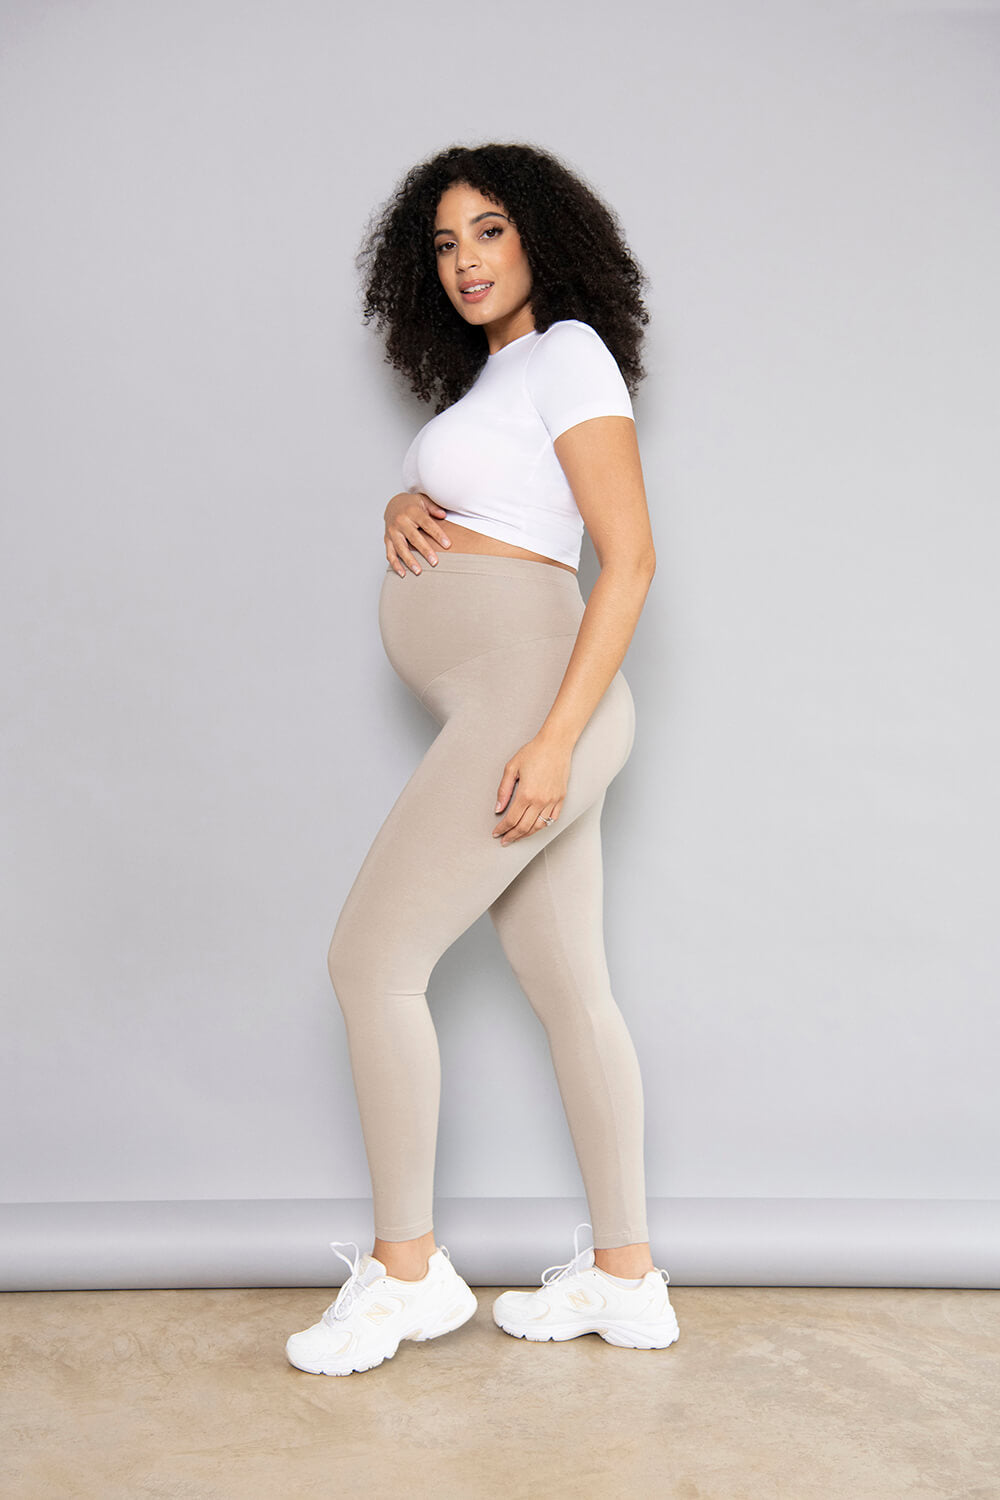 Thick Heavy & Warm Maternity Cotton Leggings Ankle Length PREGNANCY